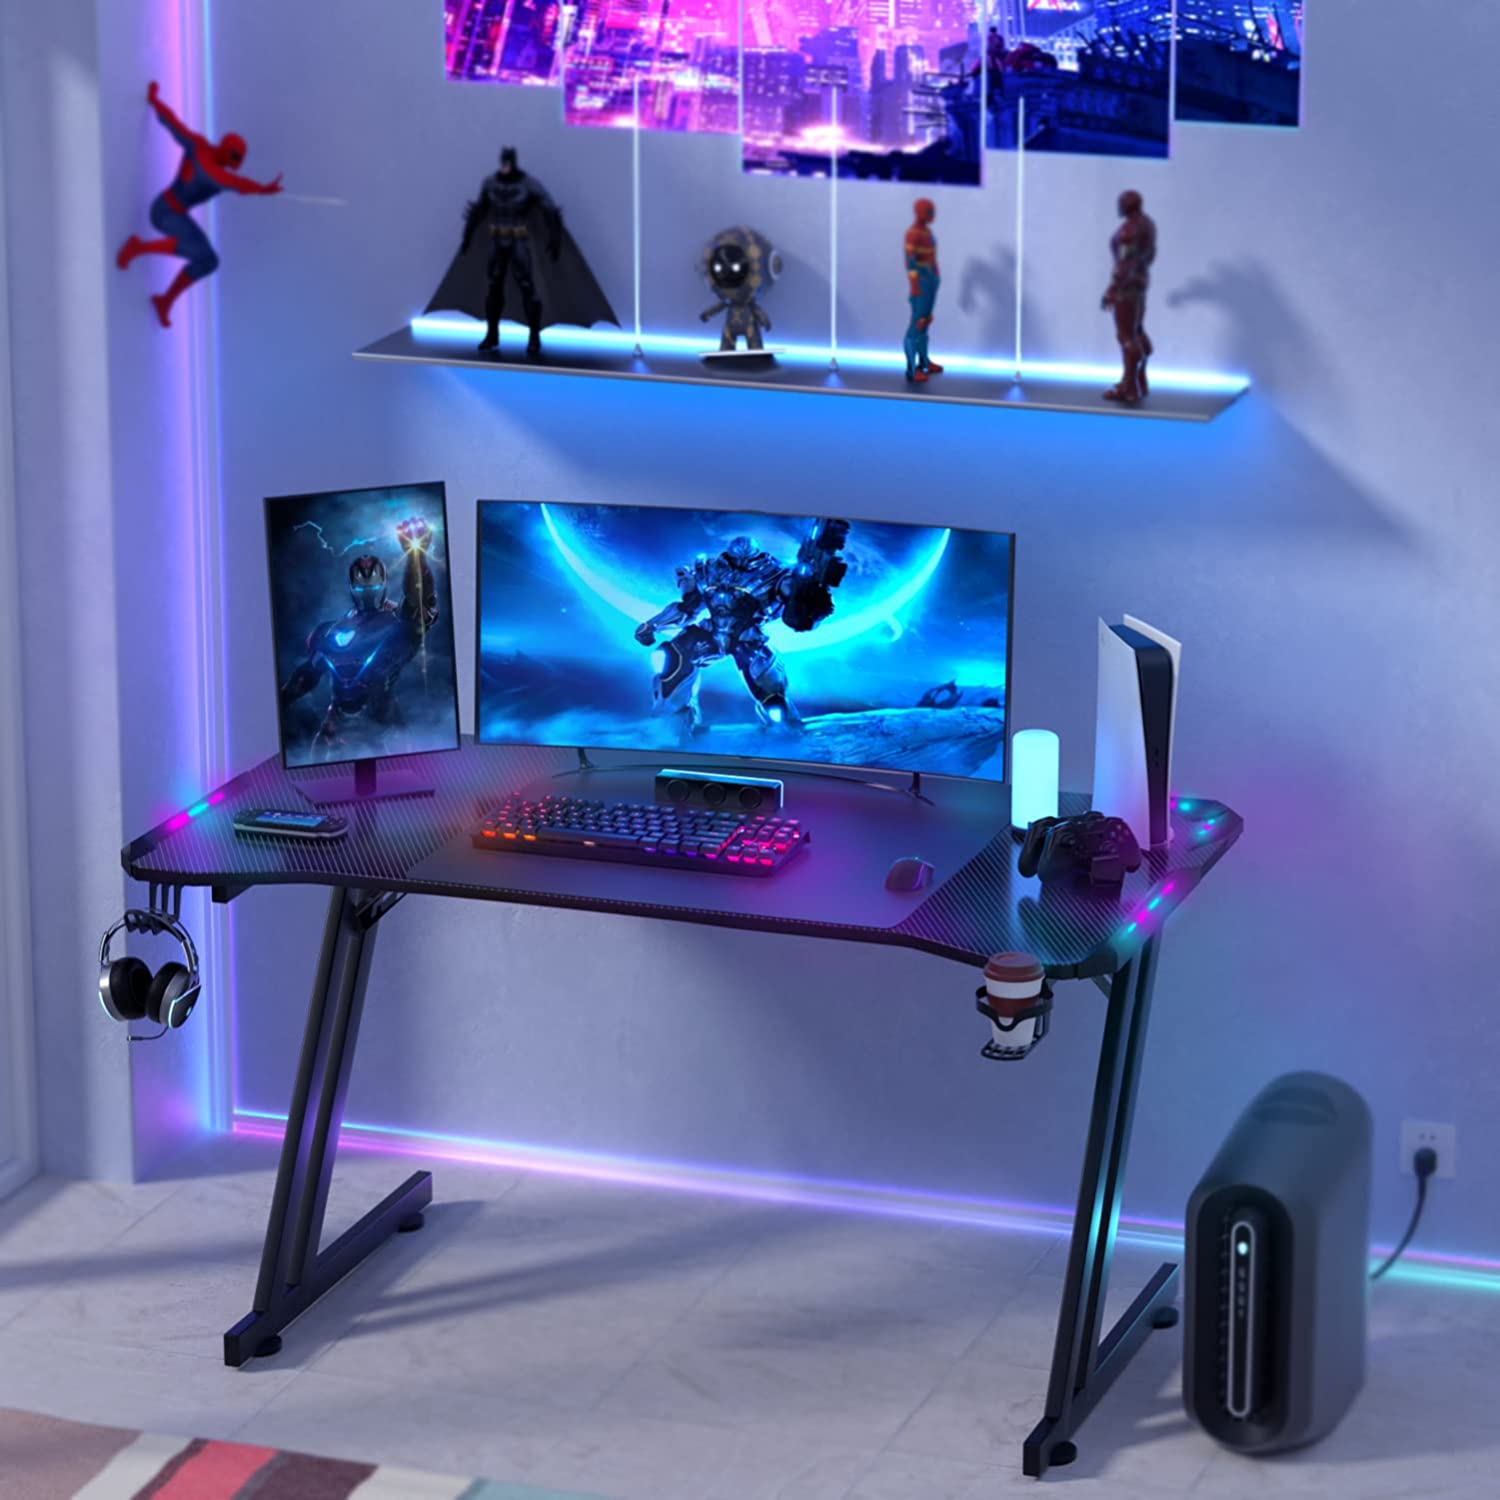 BrightGamers Desk - Elevate Your Game